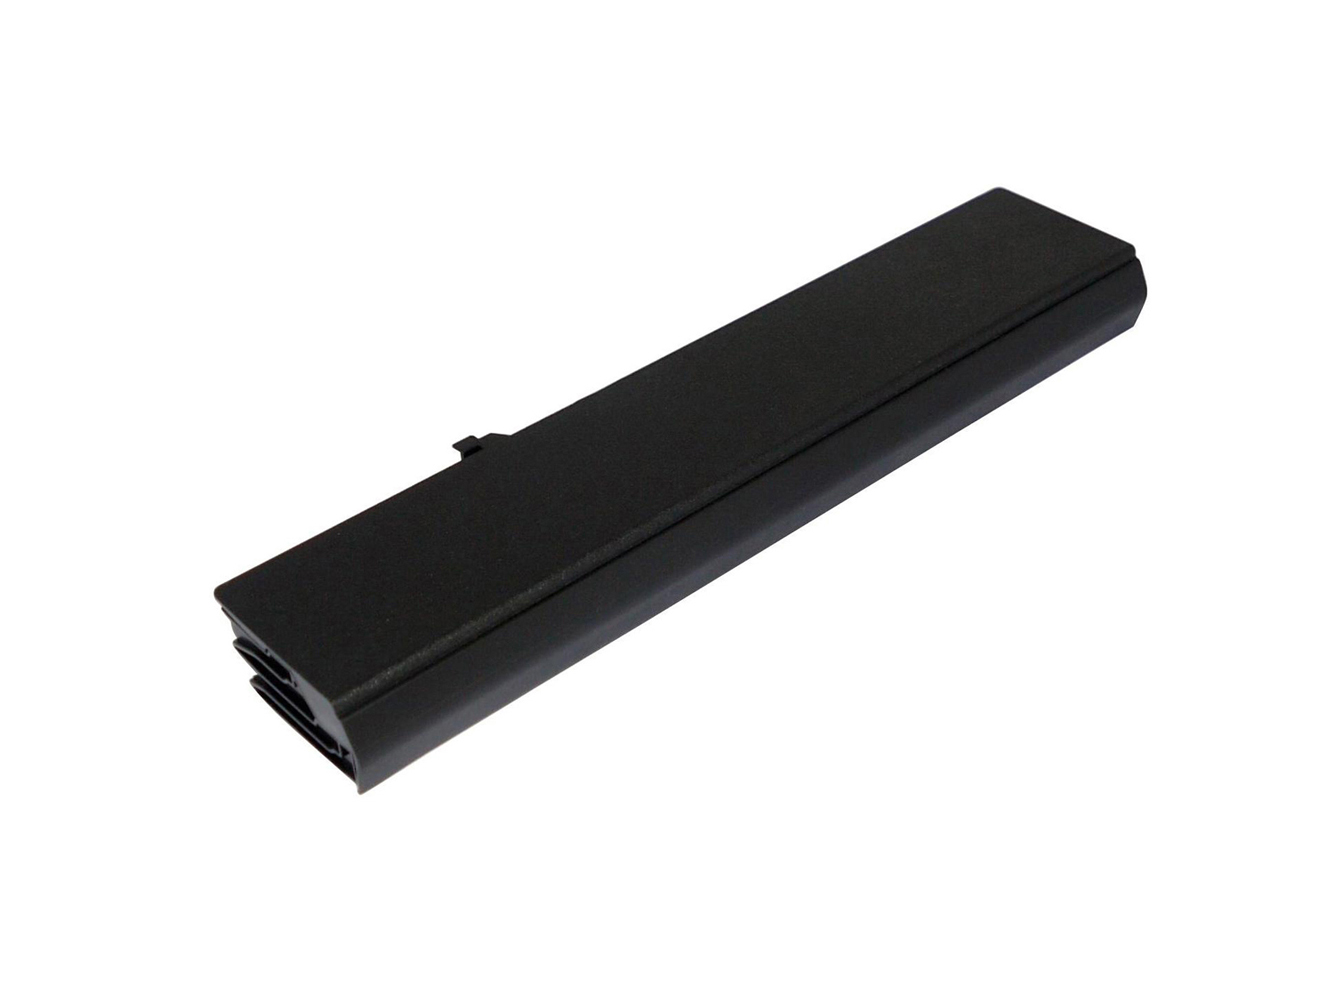 0XXDG0, 451-11354 replacement Laptop Battery for Dell Vostro 3300, 2300mAh, 14.80V